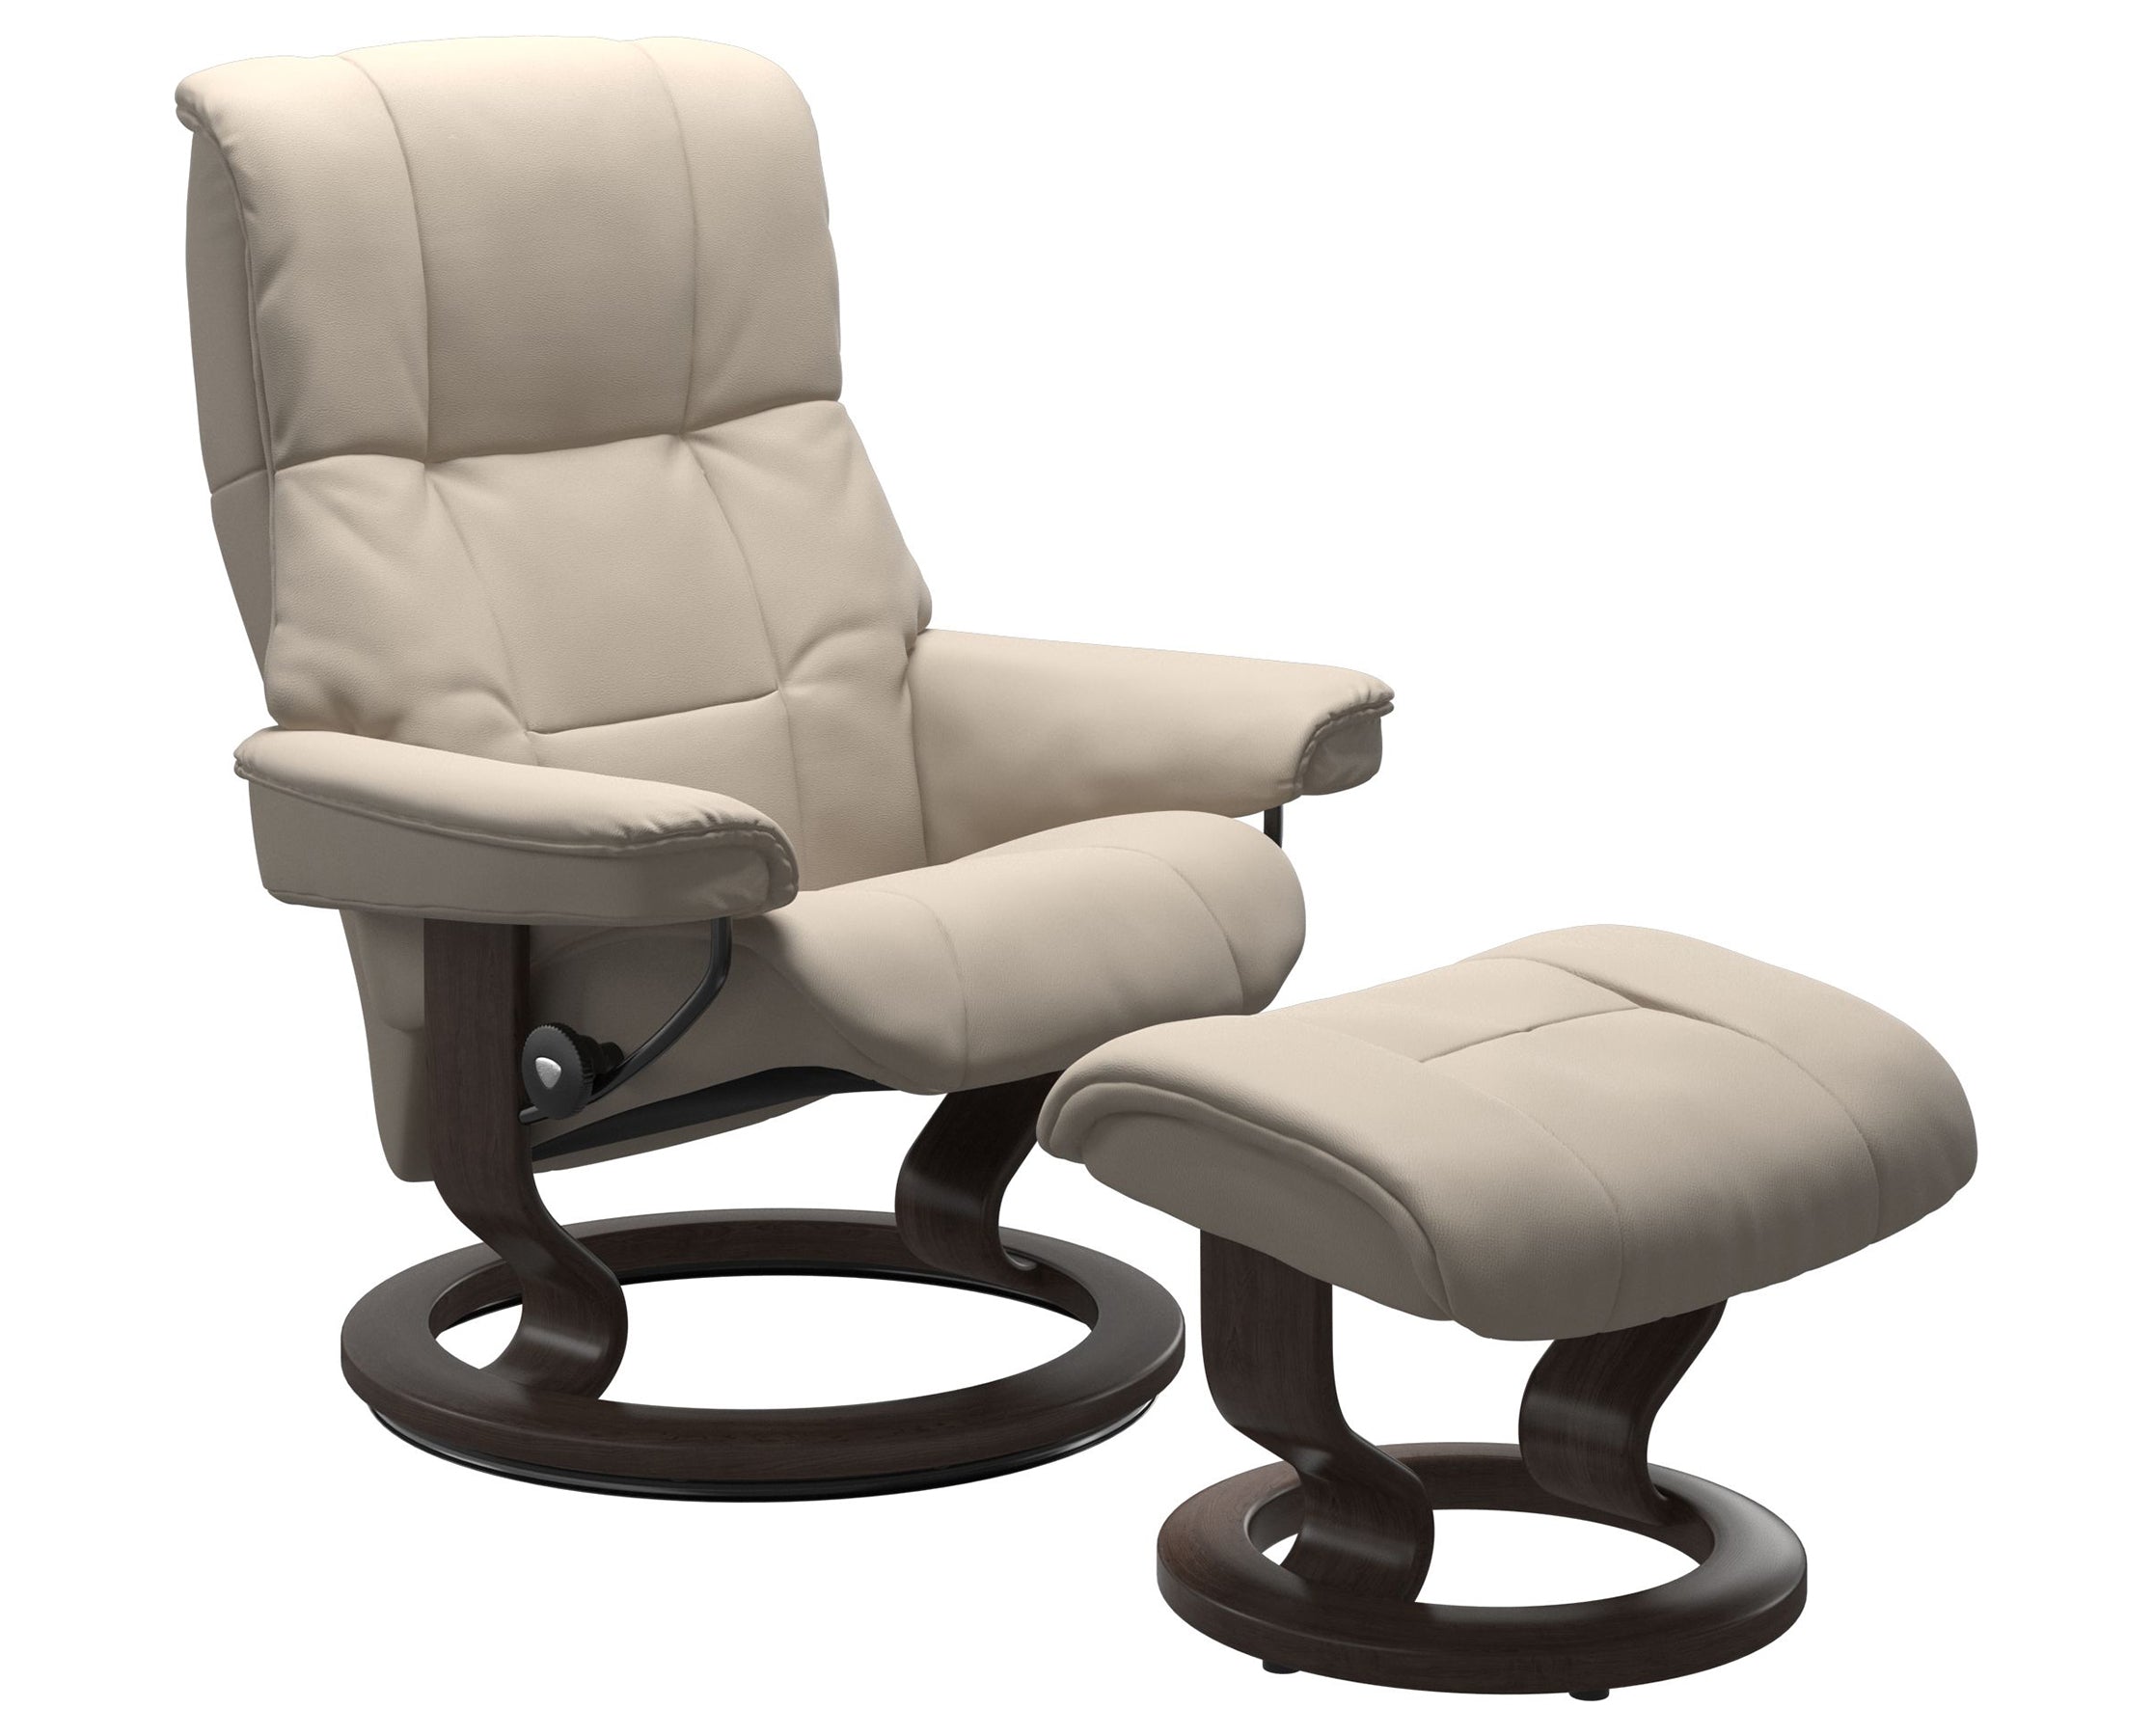 Paloma Leather Fog S/M/L and Wenge Base | Stressless Mayfair Classic Recliner | Valley Ridge Furniture